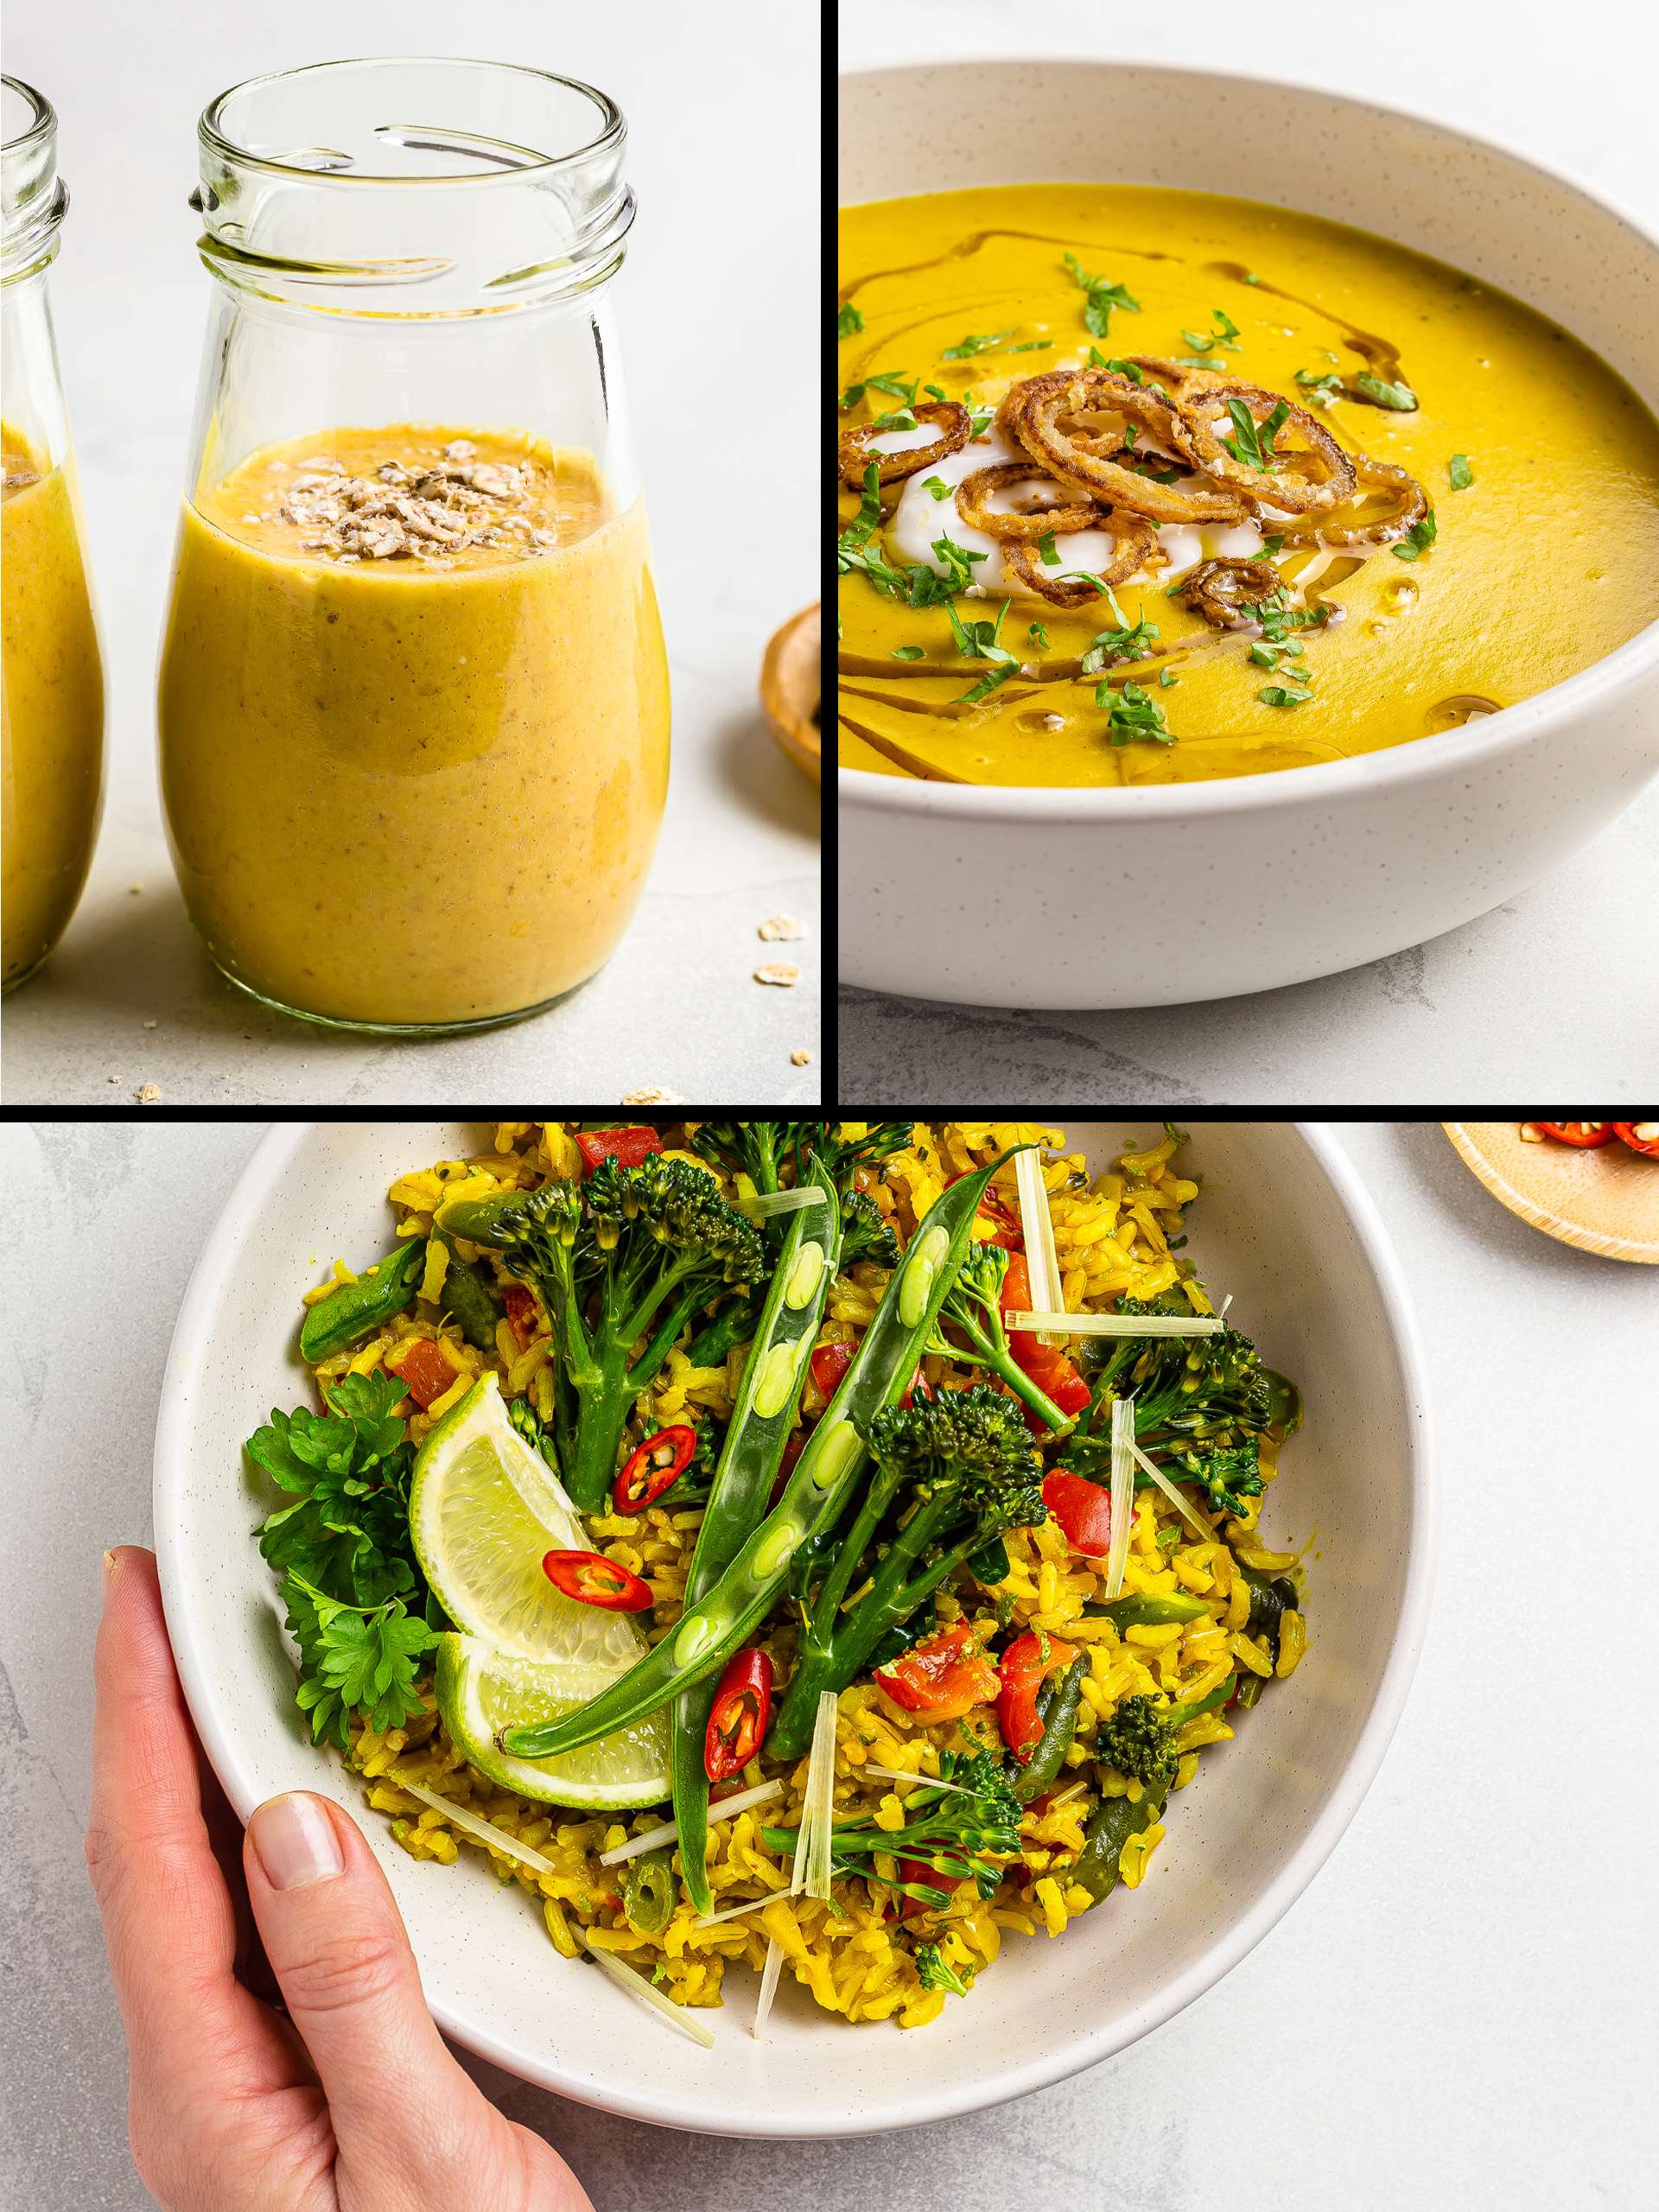 15 Healthy Ways to Add Turmeric to Your Diet